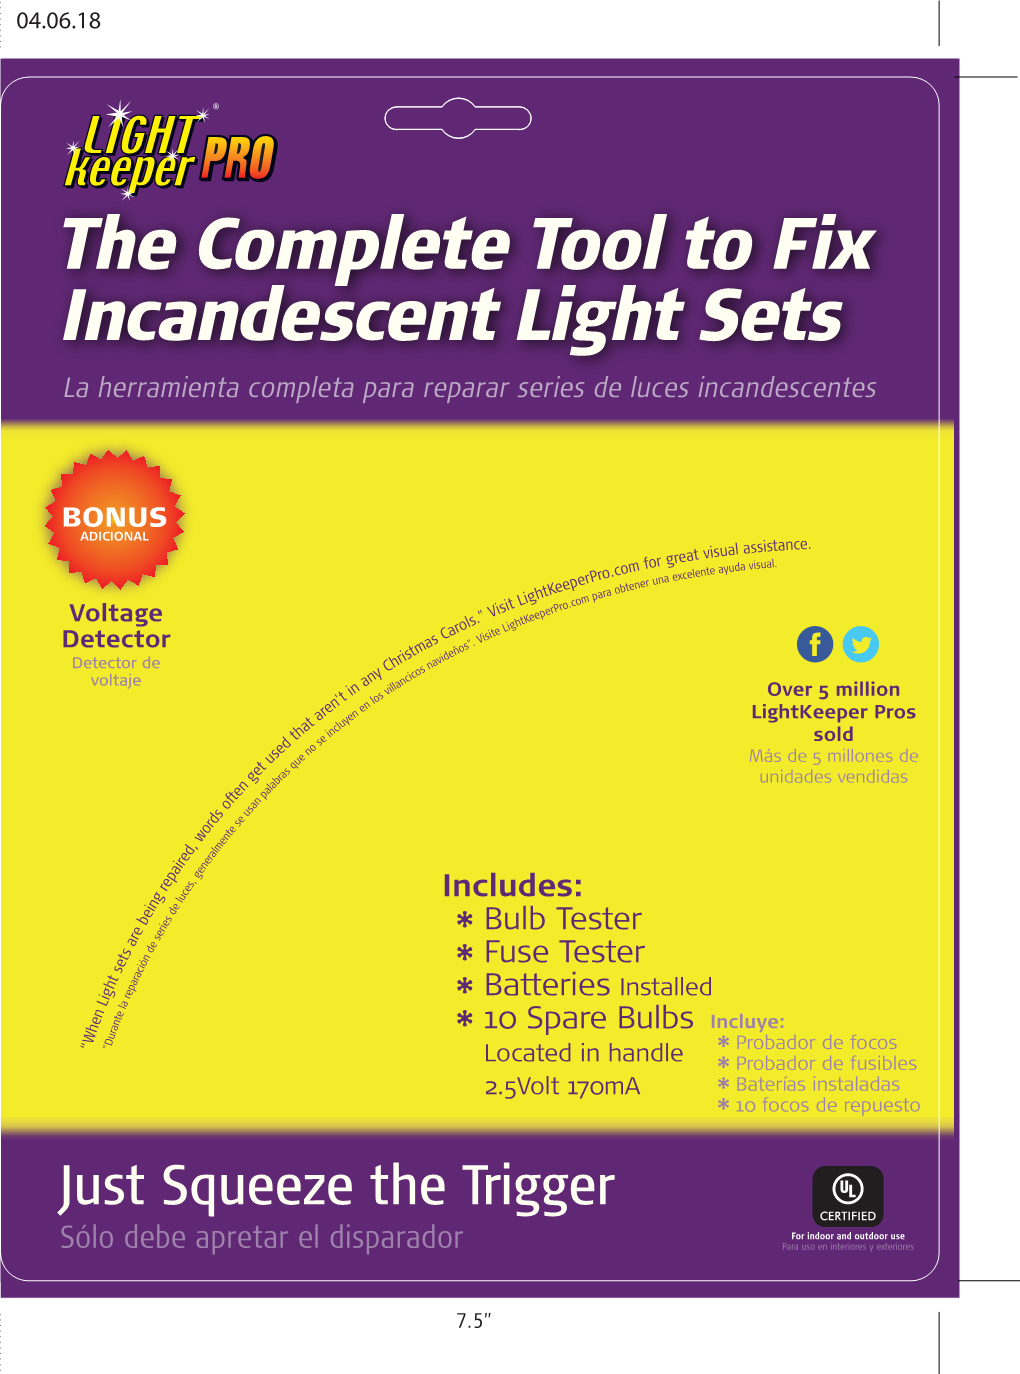 The Complete Tool to Fix Incandescent Light Sets